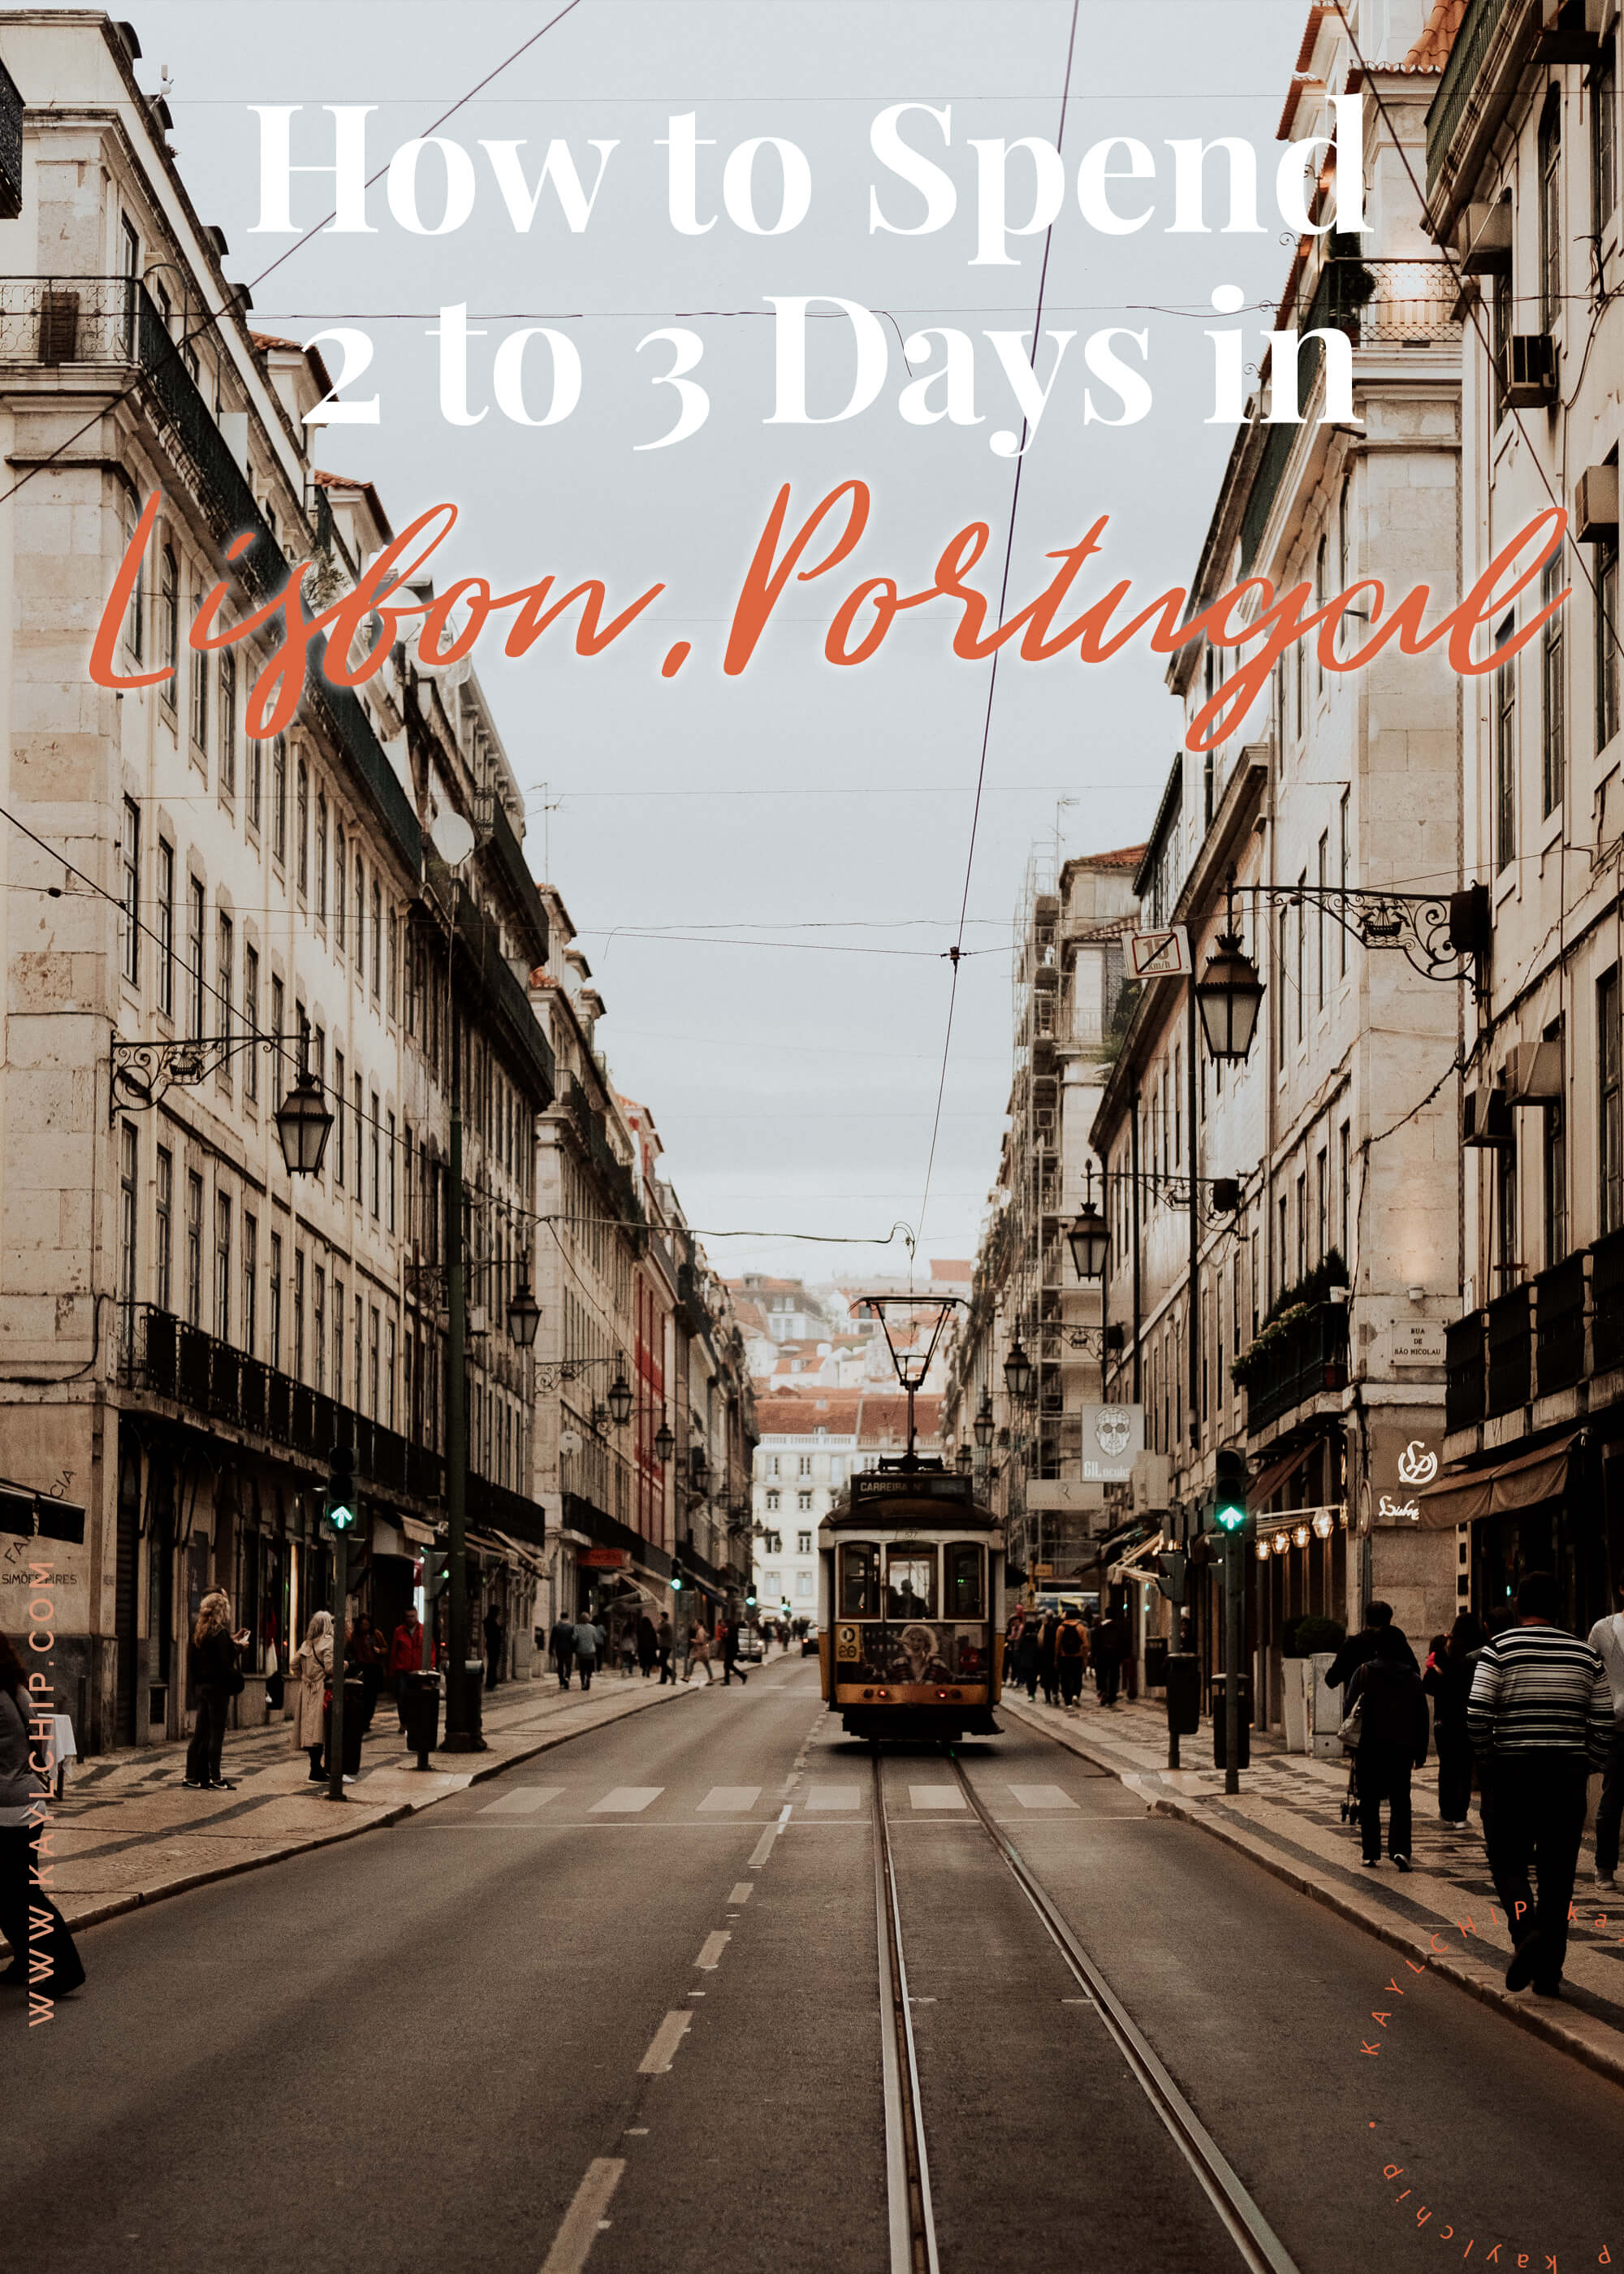 How to Spend 2 to 3 Days in Lisbon